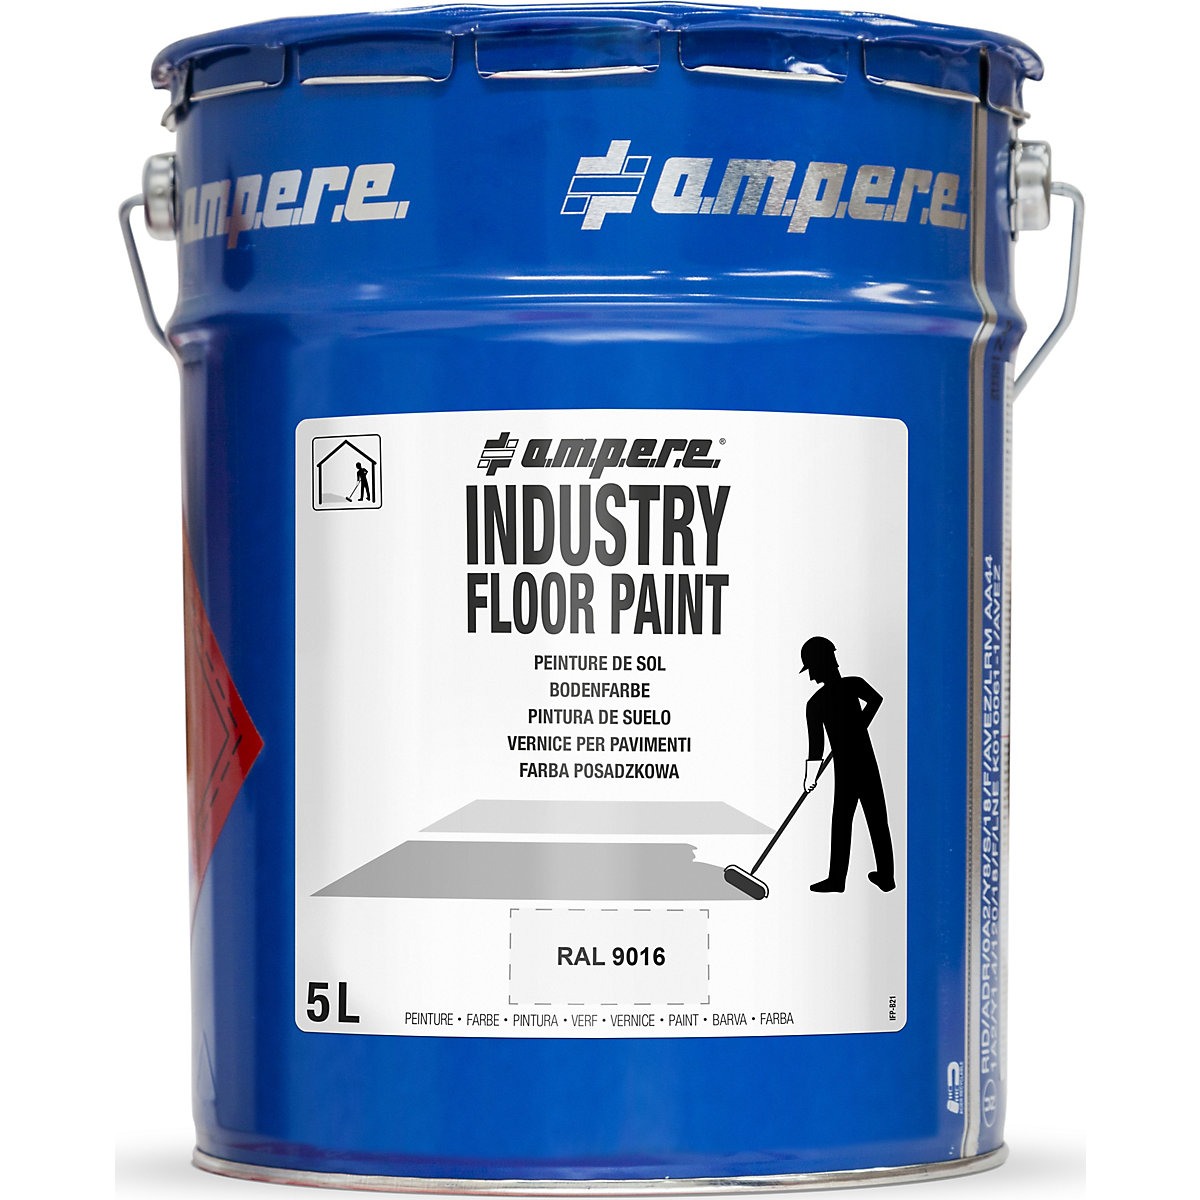 Industry Floor Paint® ground marking paint - Ampere